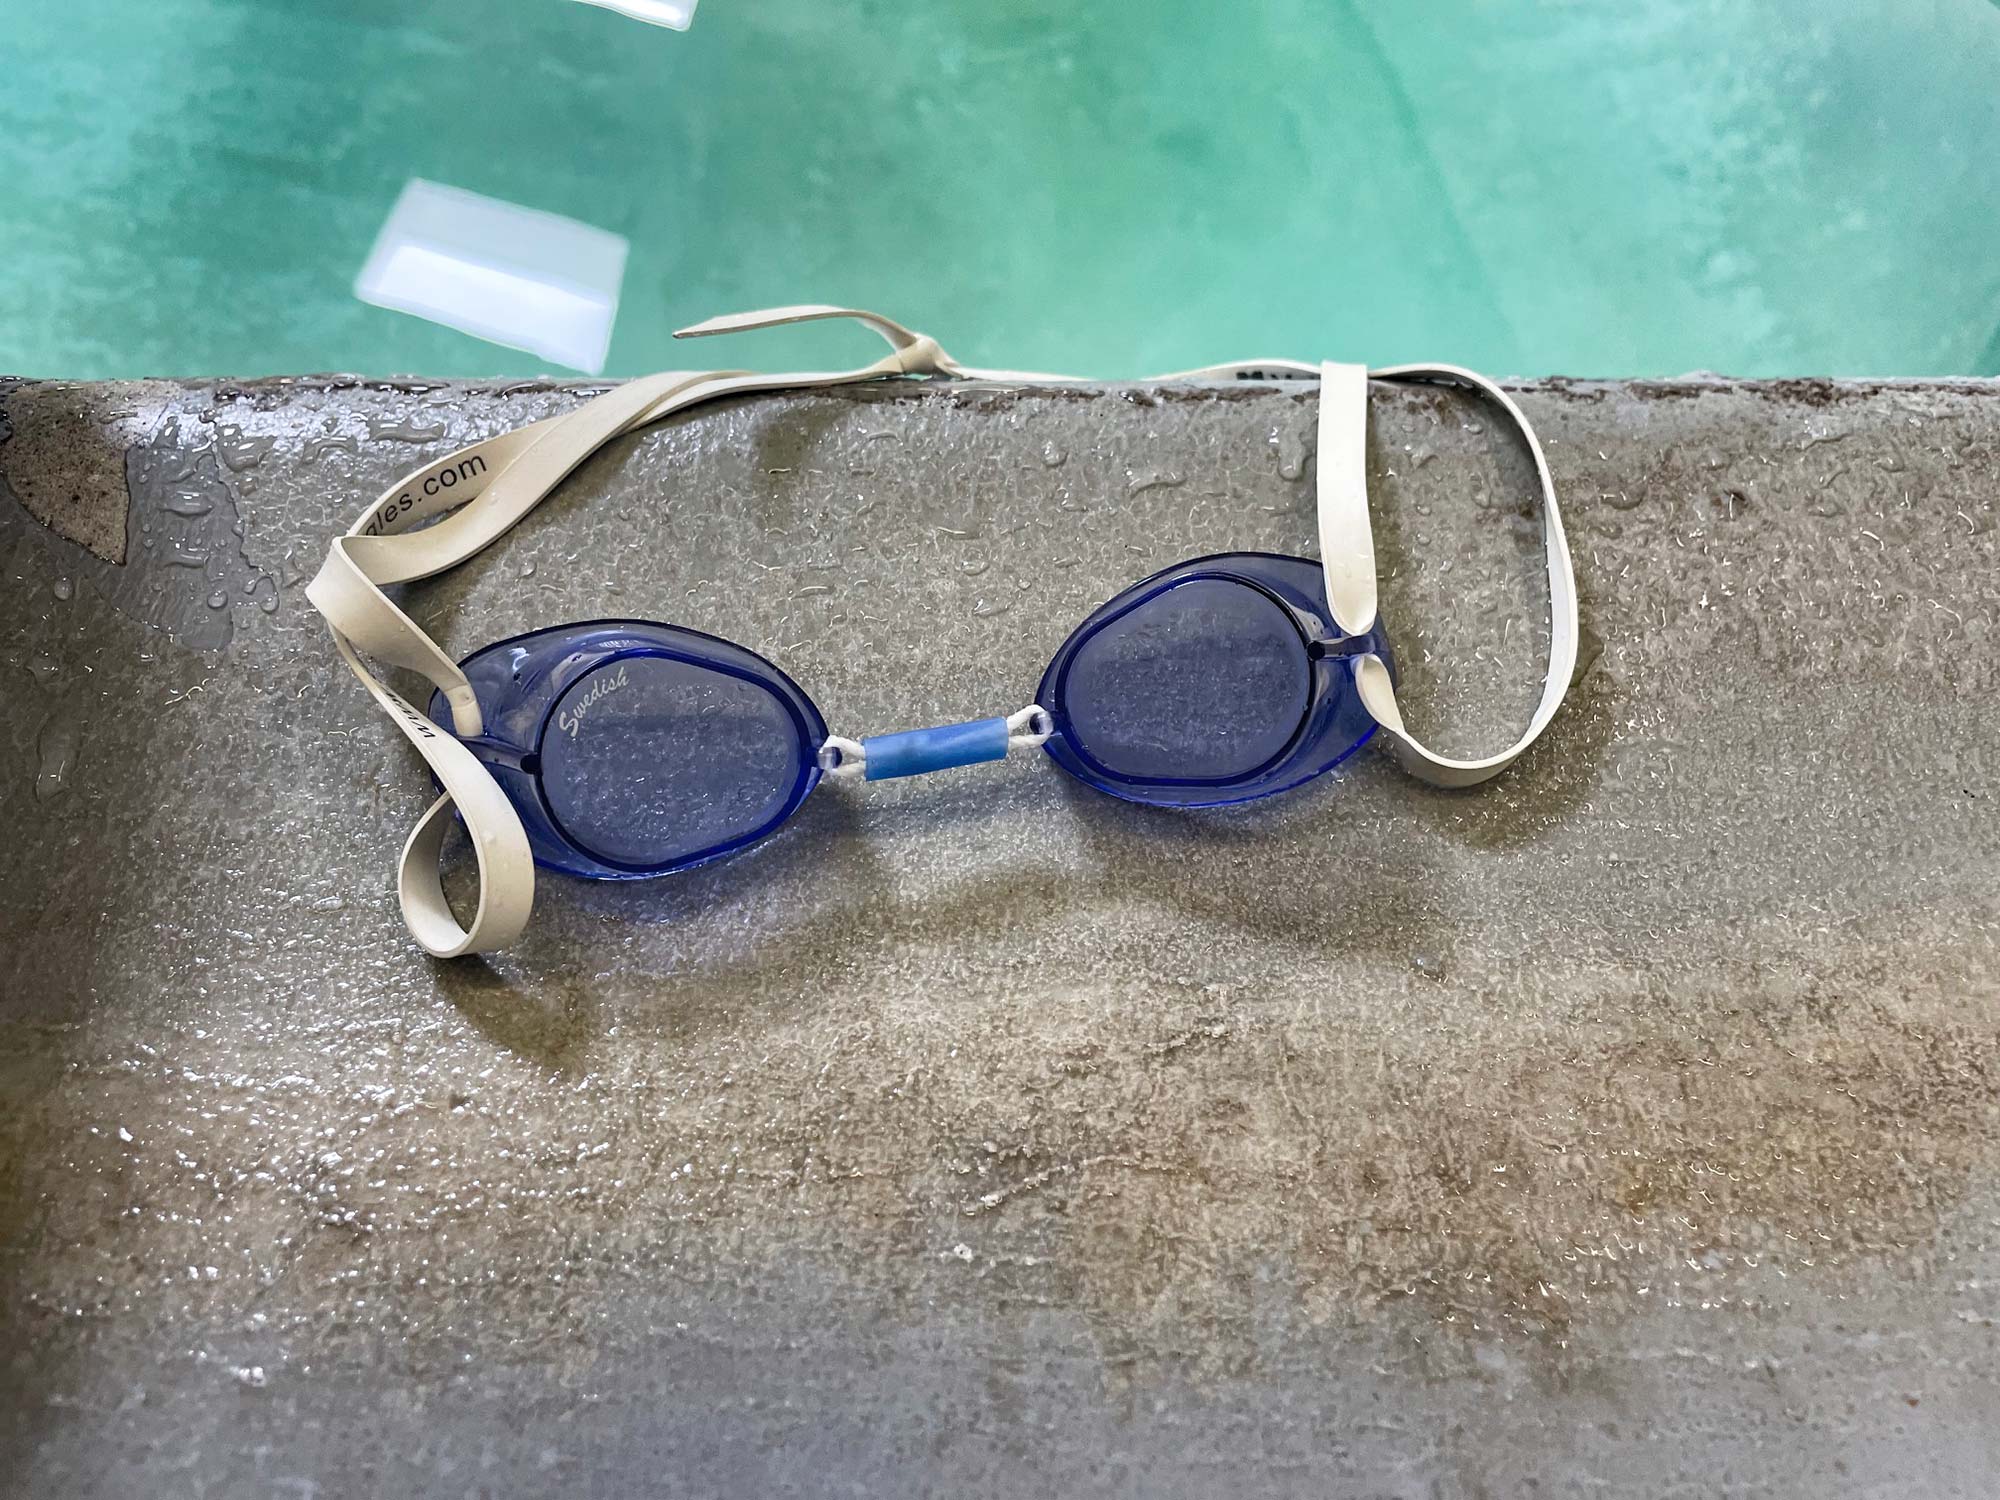 A set of violet goggles with a blue nose bridge and white band sit on a gray tile pool deck